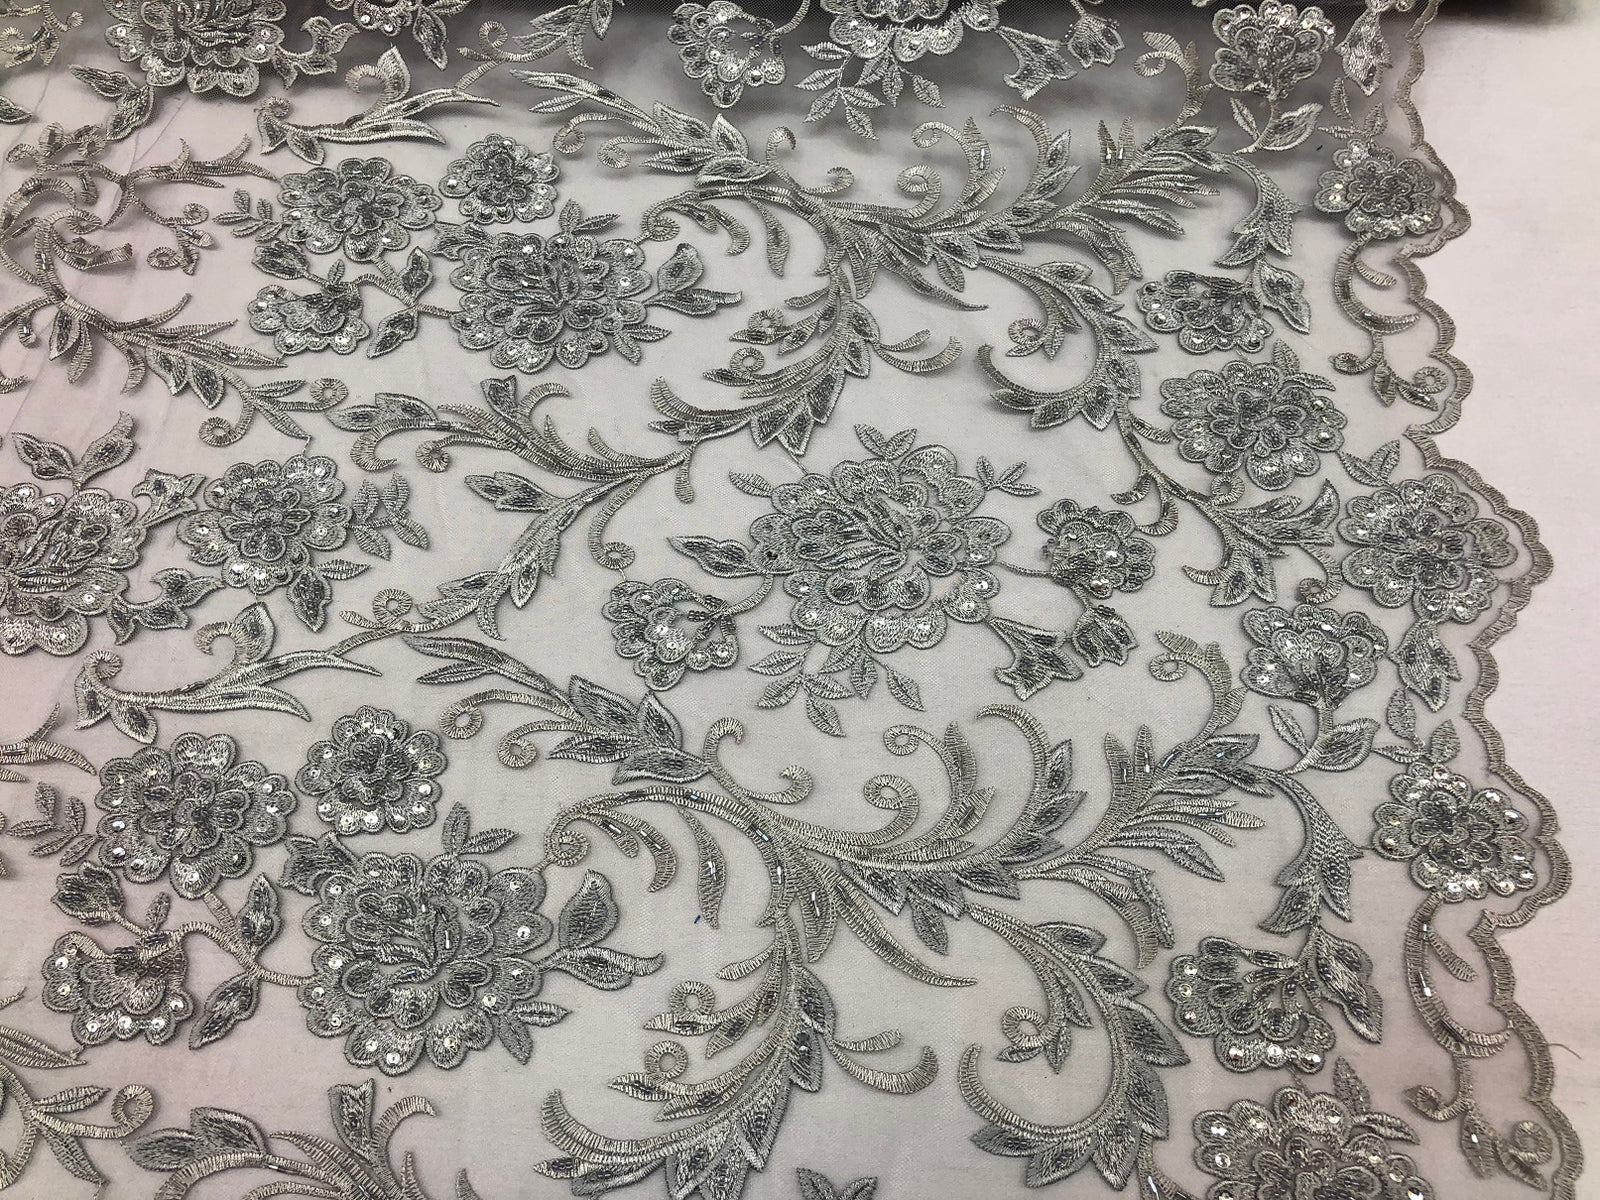 Beaded Floral - SILVER - Luxury Wedding Bridal Embroidery Lace Fabric